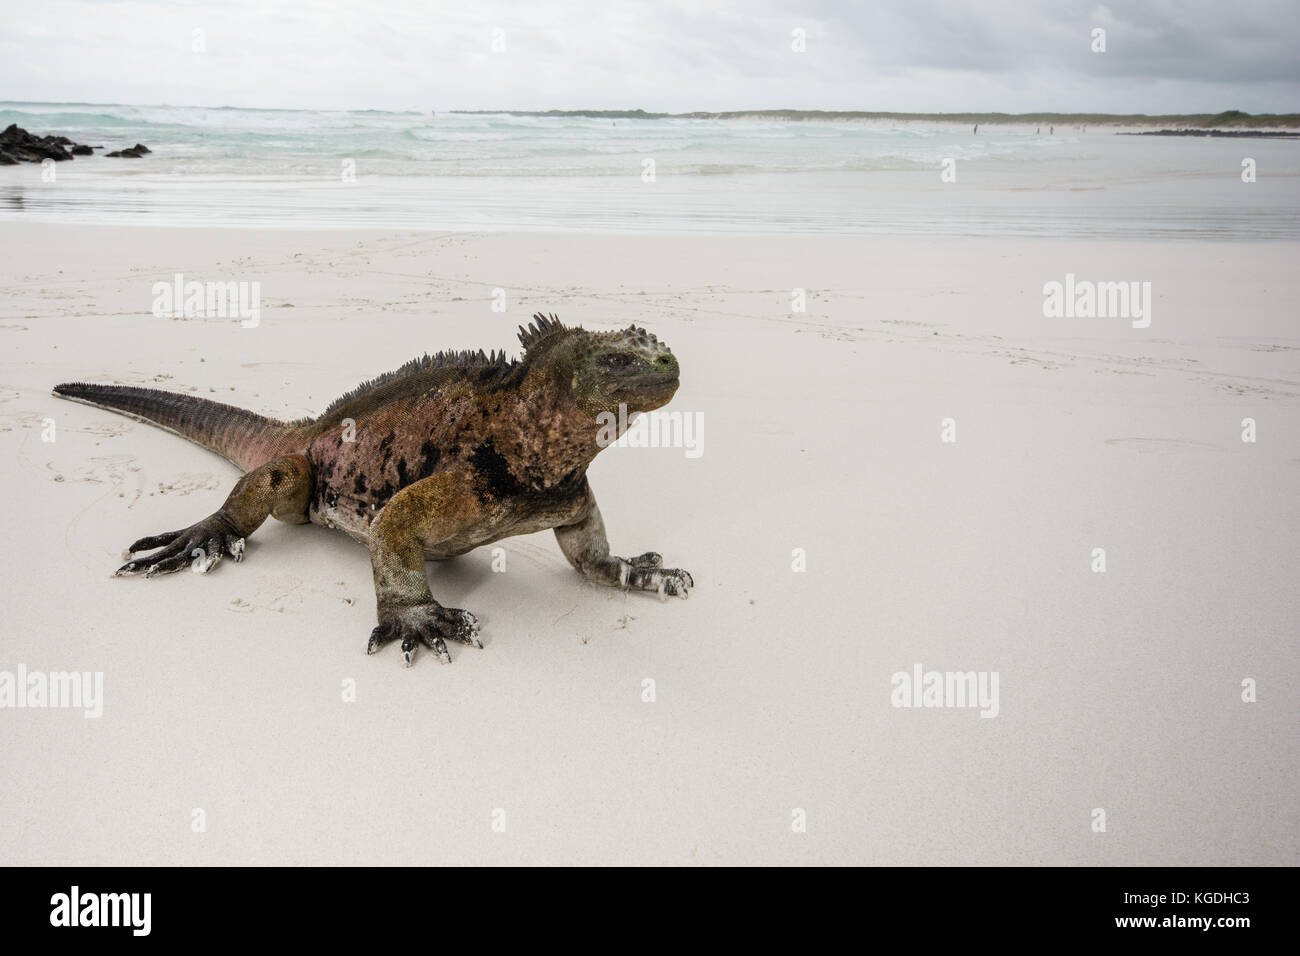 A marine iguana relaxing on a scenic white sand beach in the Galapagos. Stock Photo